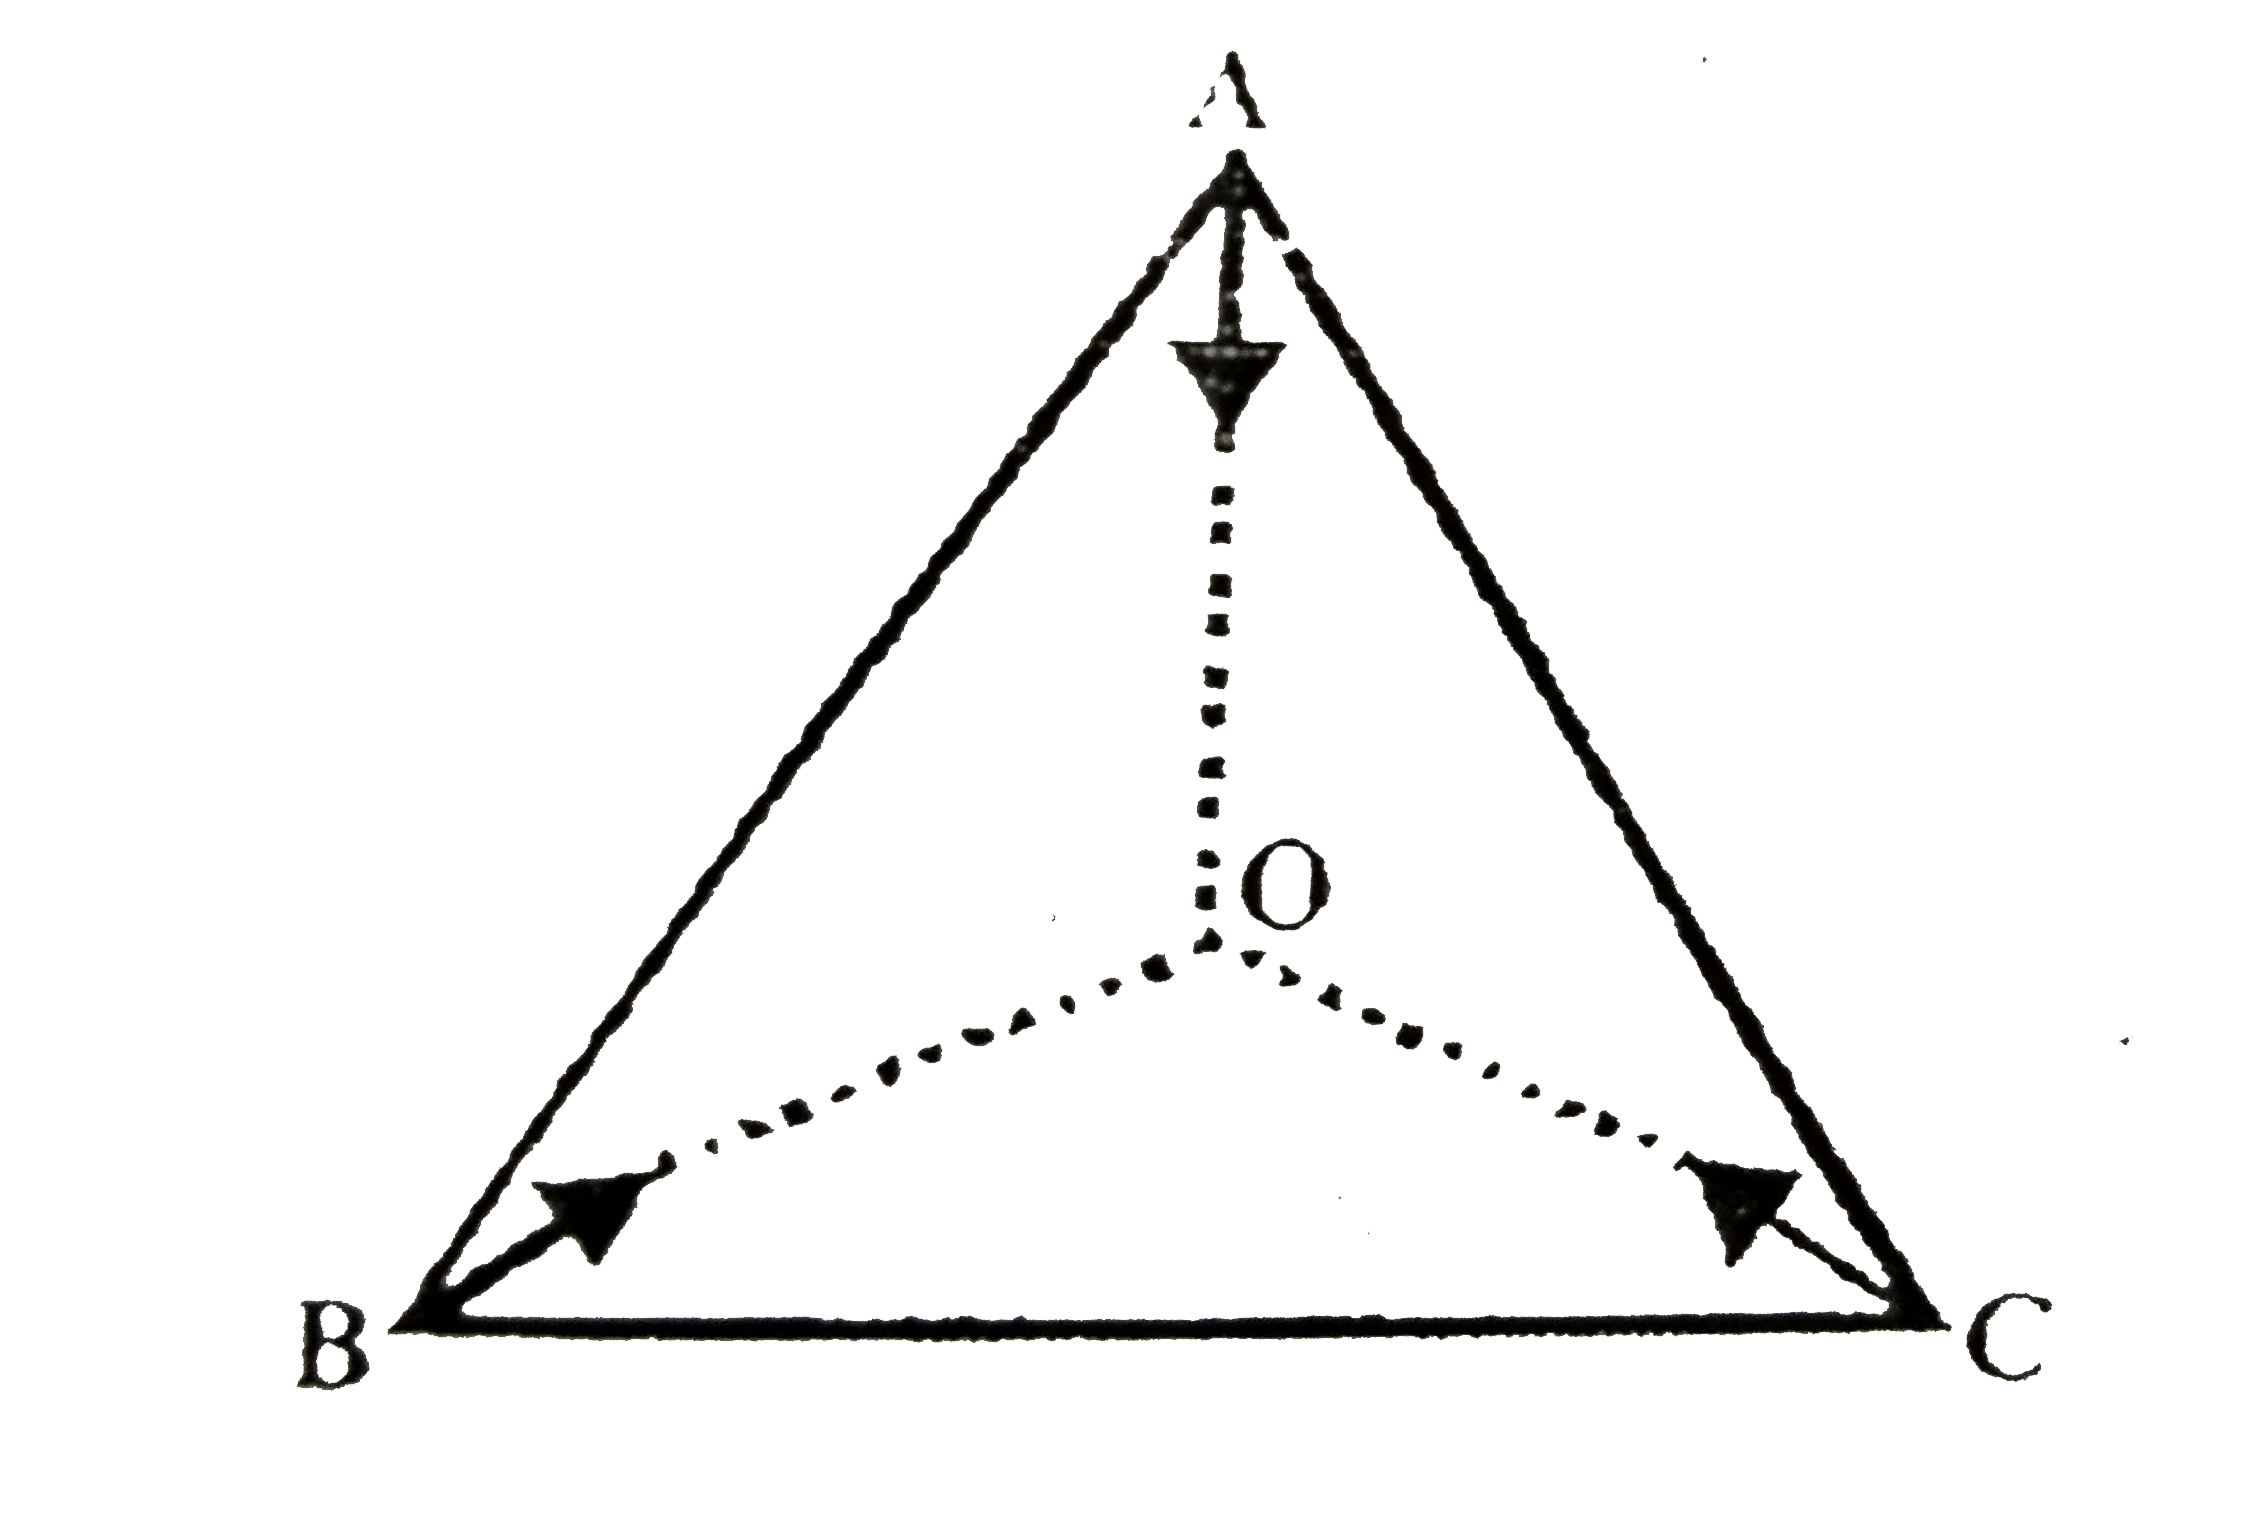 Three particles of equal masses are initial at the vertices of equilateral triangle of side 2sqrt(3)m in horizontal plane. They start moving towards centroid O with equal speed 2m//sec. After collision at O, A stops and C retraces its path with same speed. Distance between B and C just after one second of the collision is alpham. Here alpha is an integer. Find alpha.